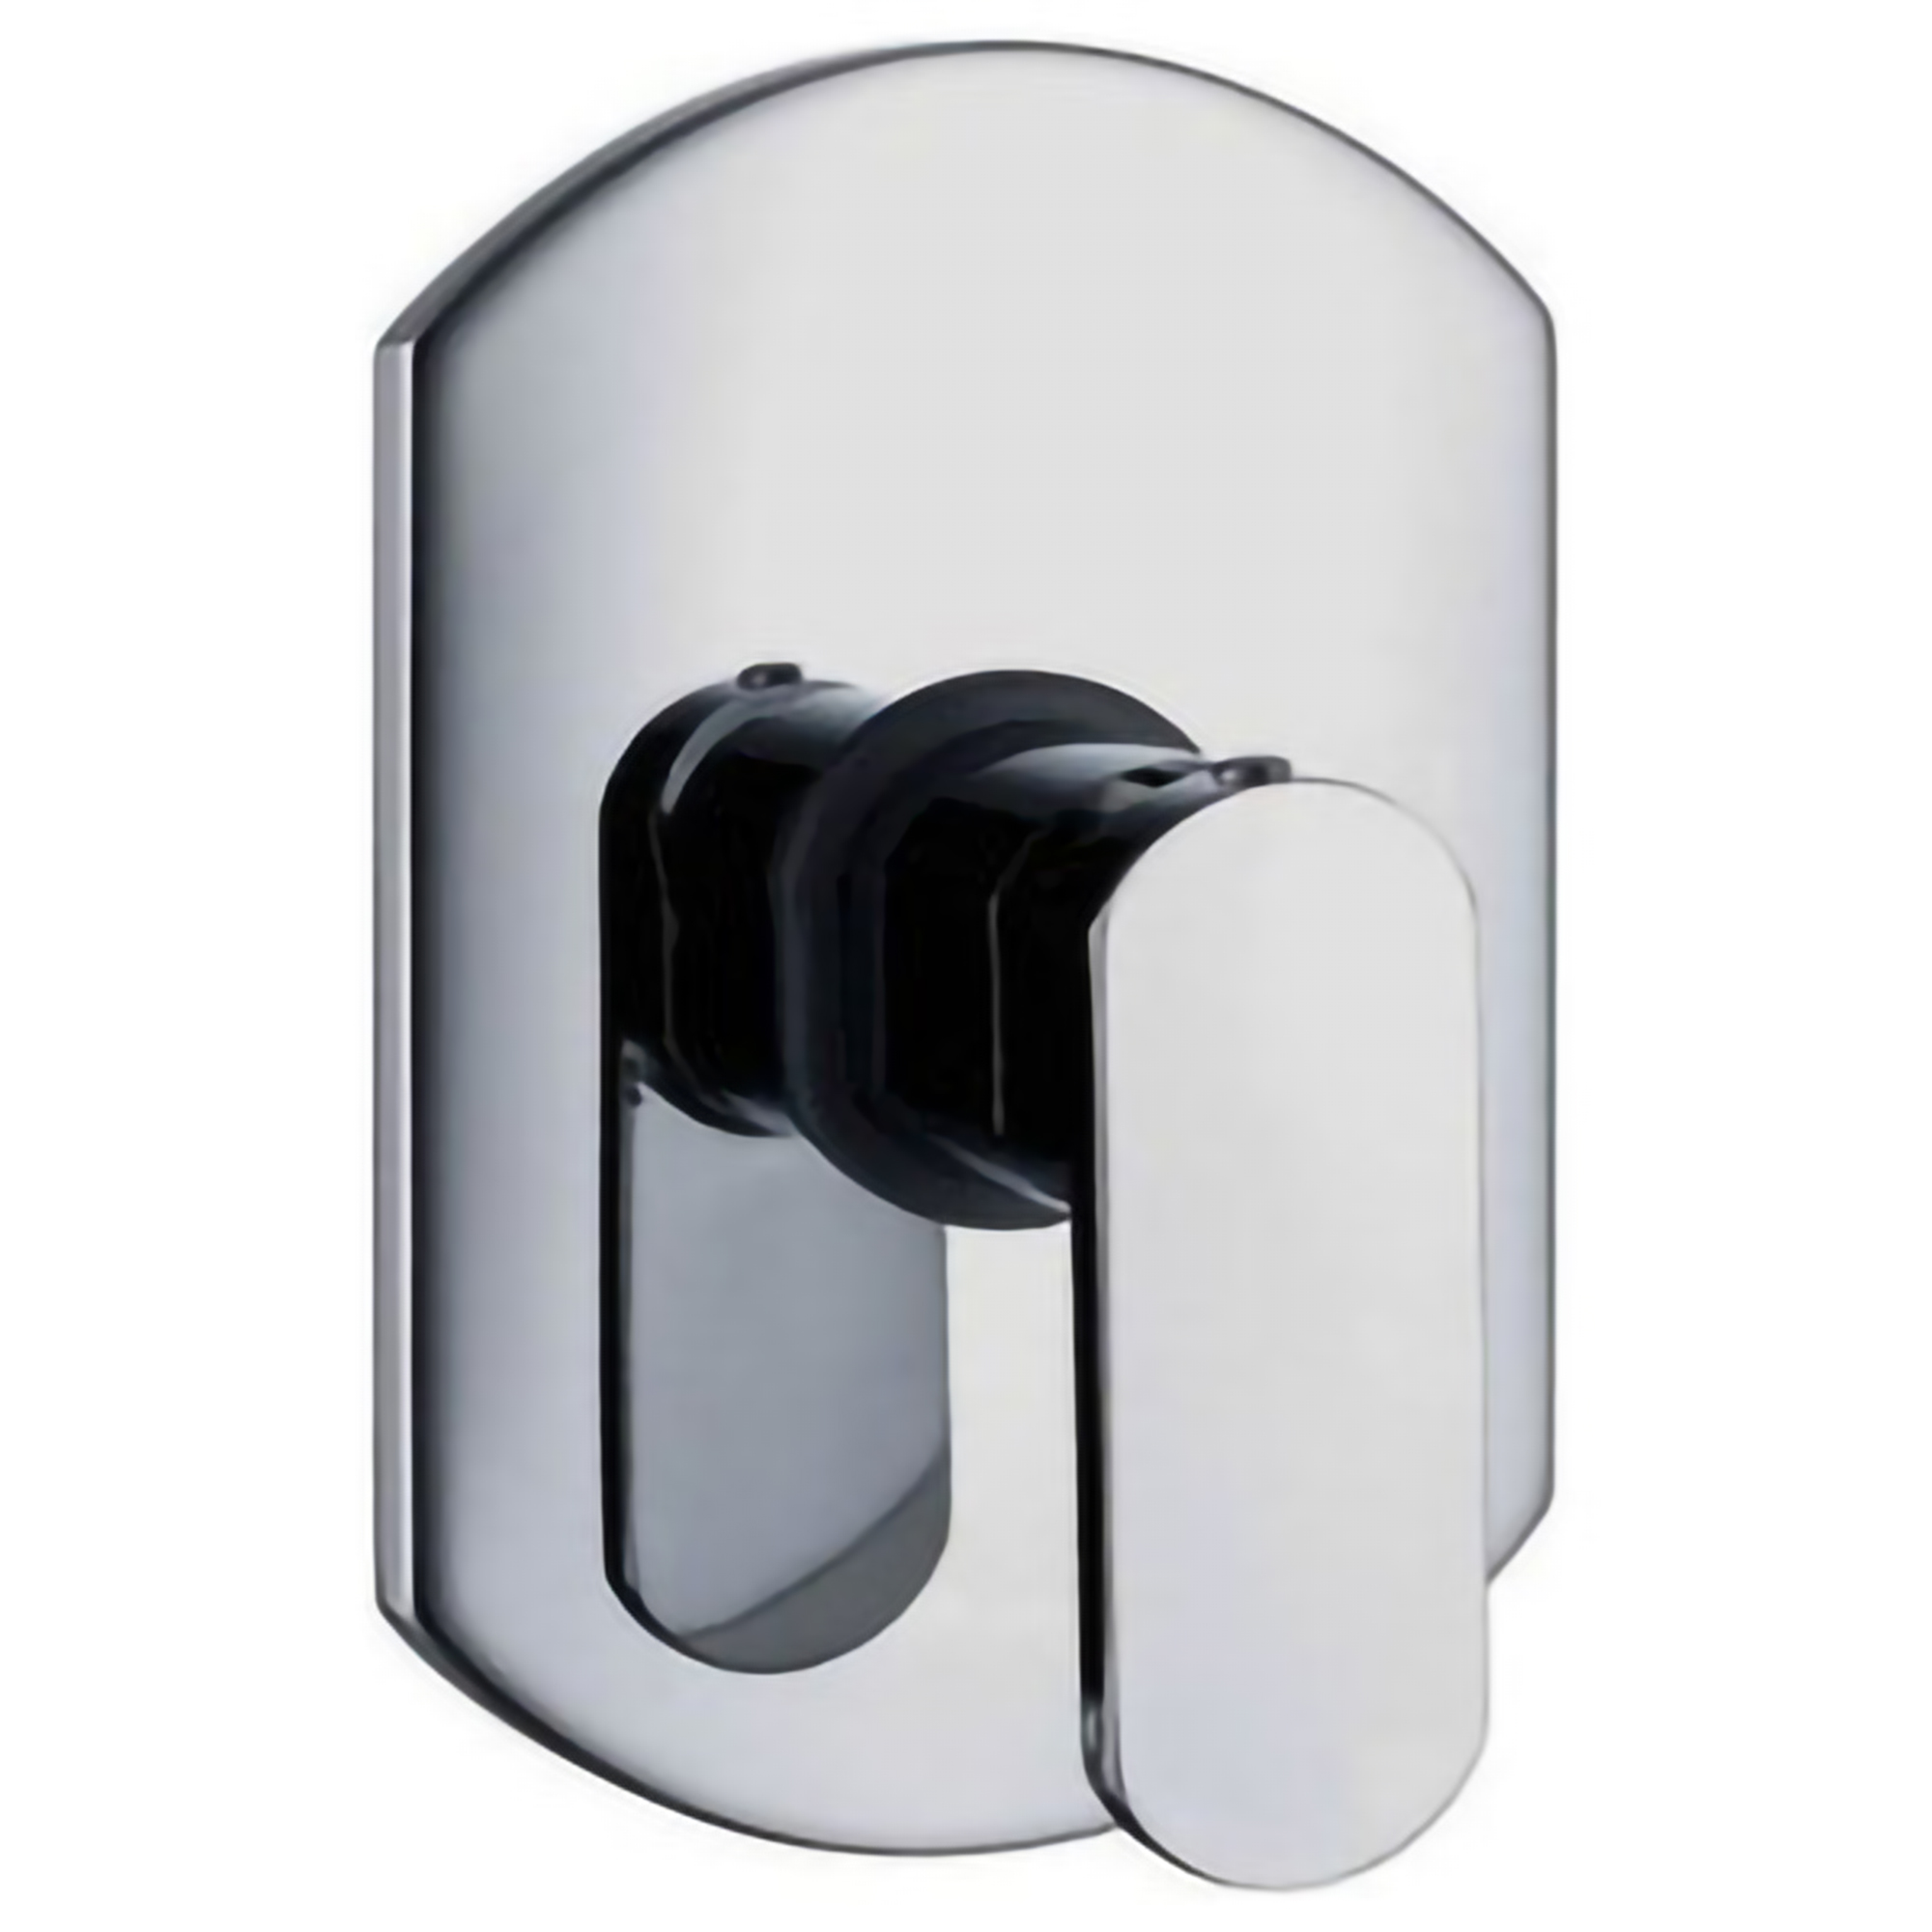 Fontana Lima Chrome Solid Brass In Wall Mixer Control Valve For Fontana Shower Control Valve In Wall Shower Set